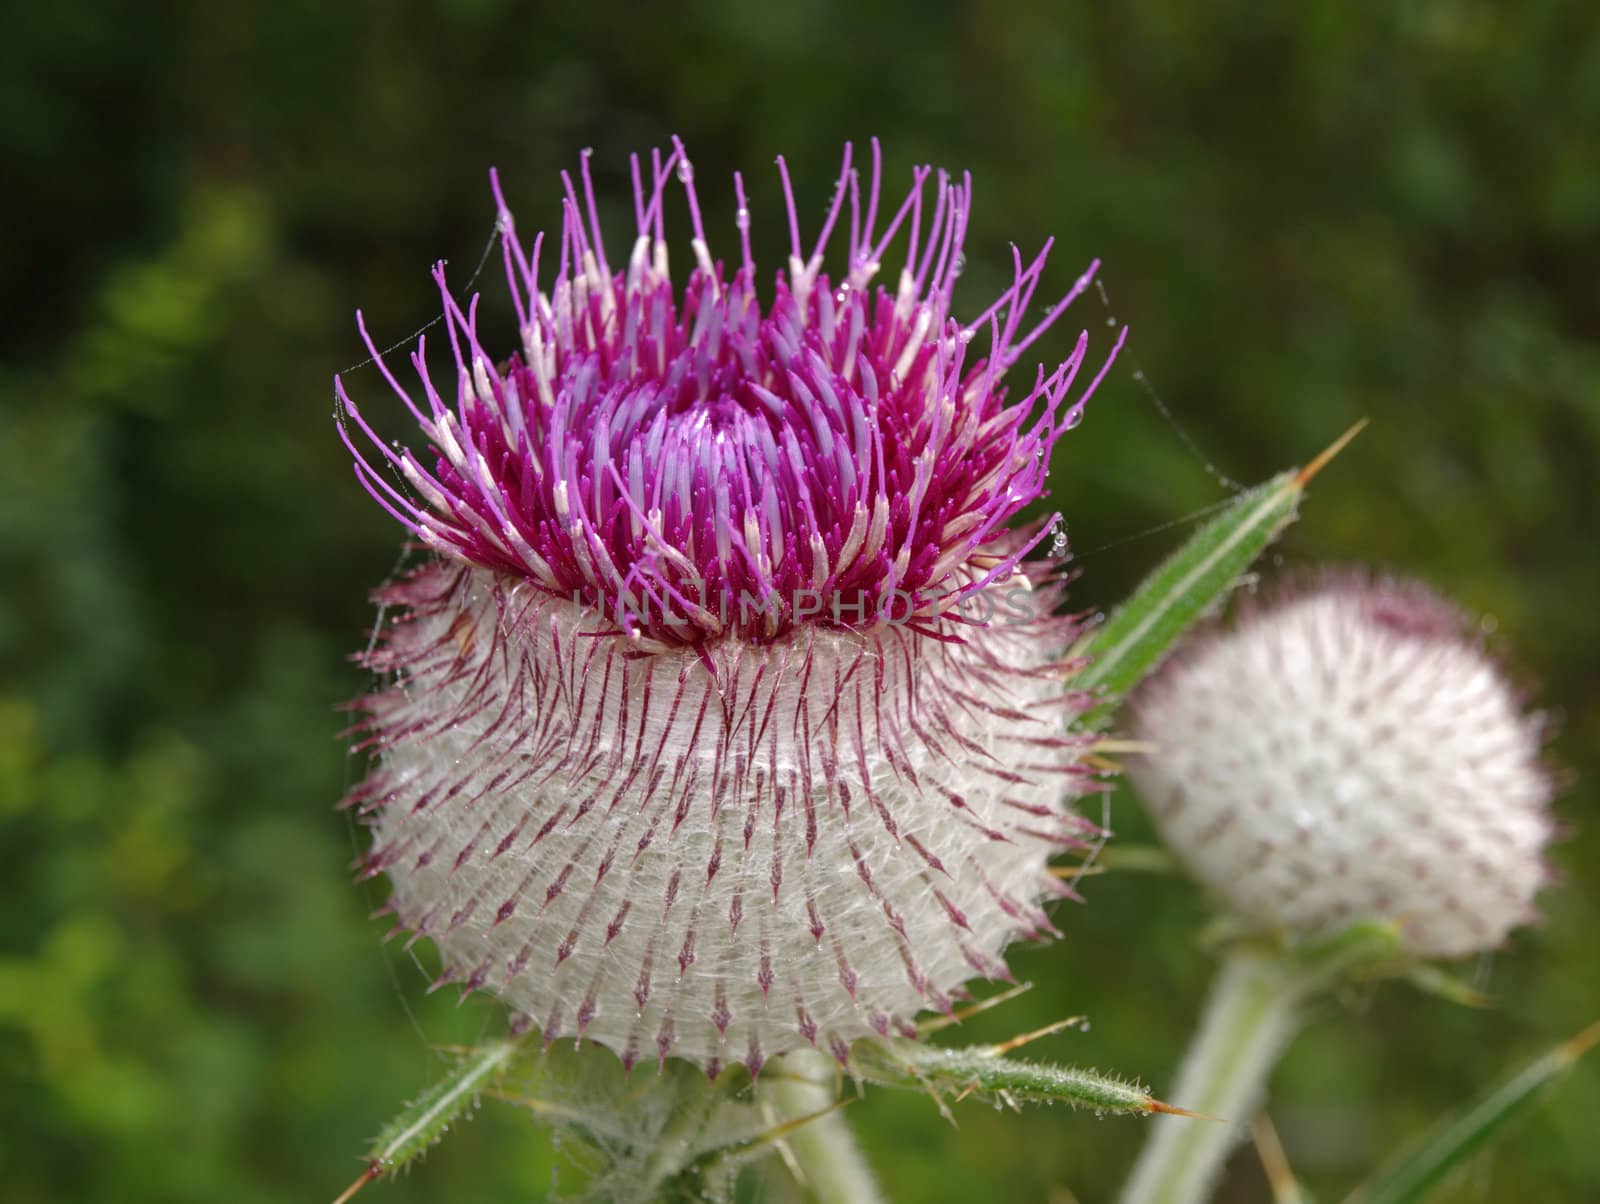 Nice thistle blossom by renales